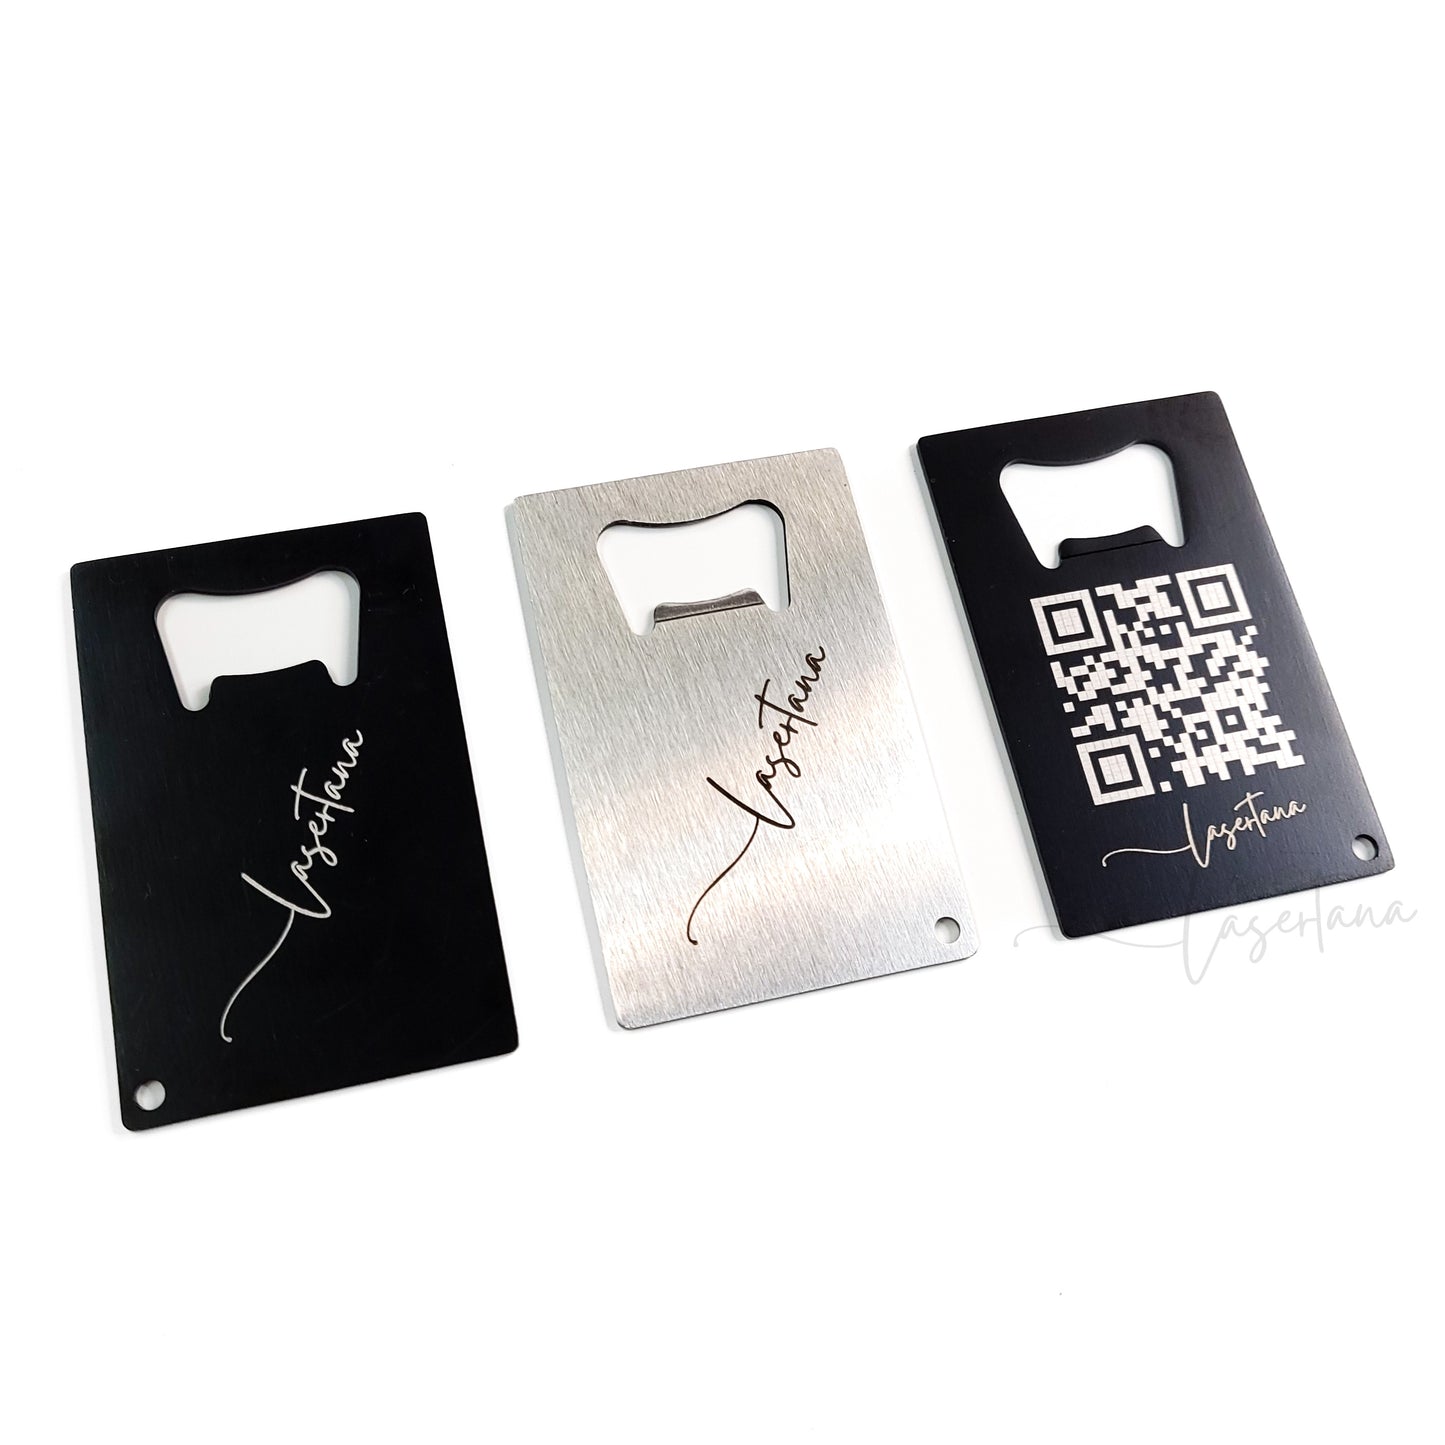 Personalized Metal Credit Card Bottle openers